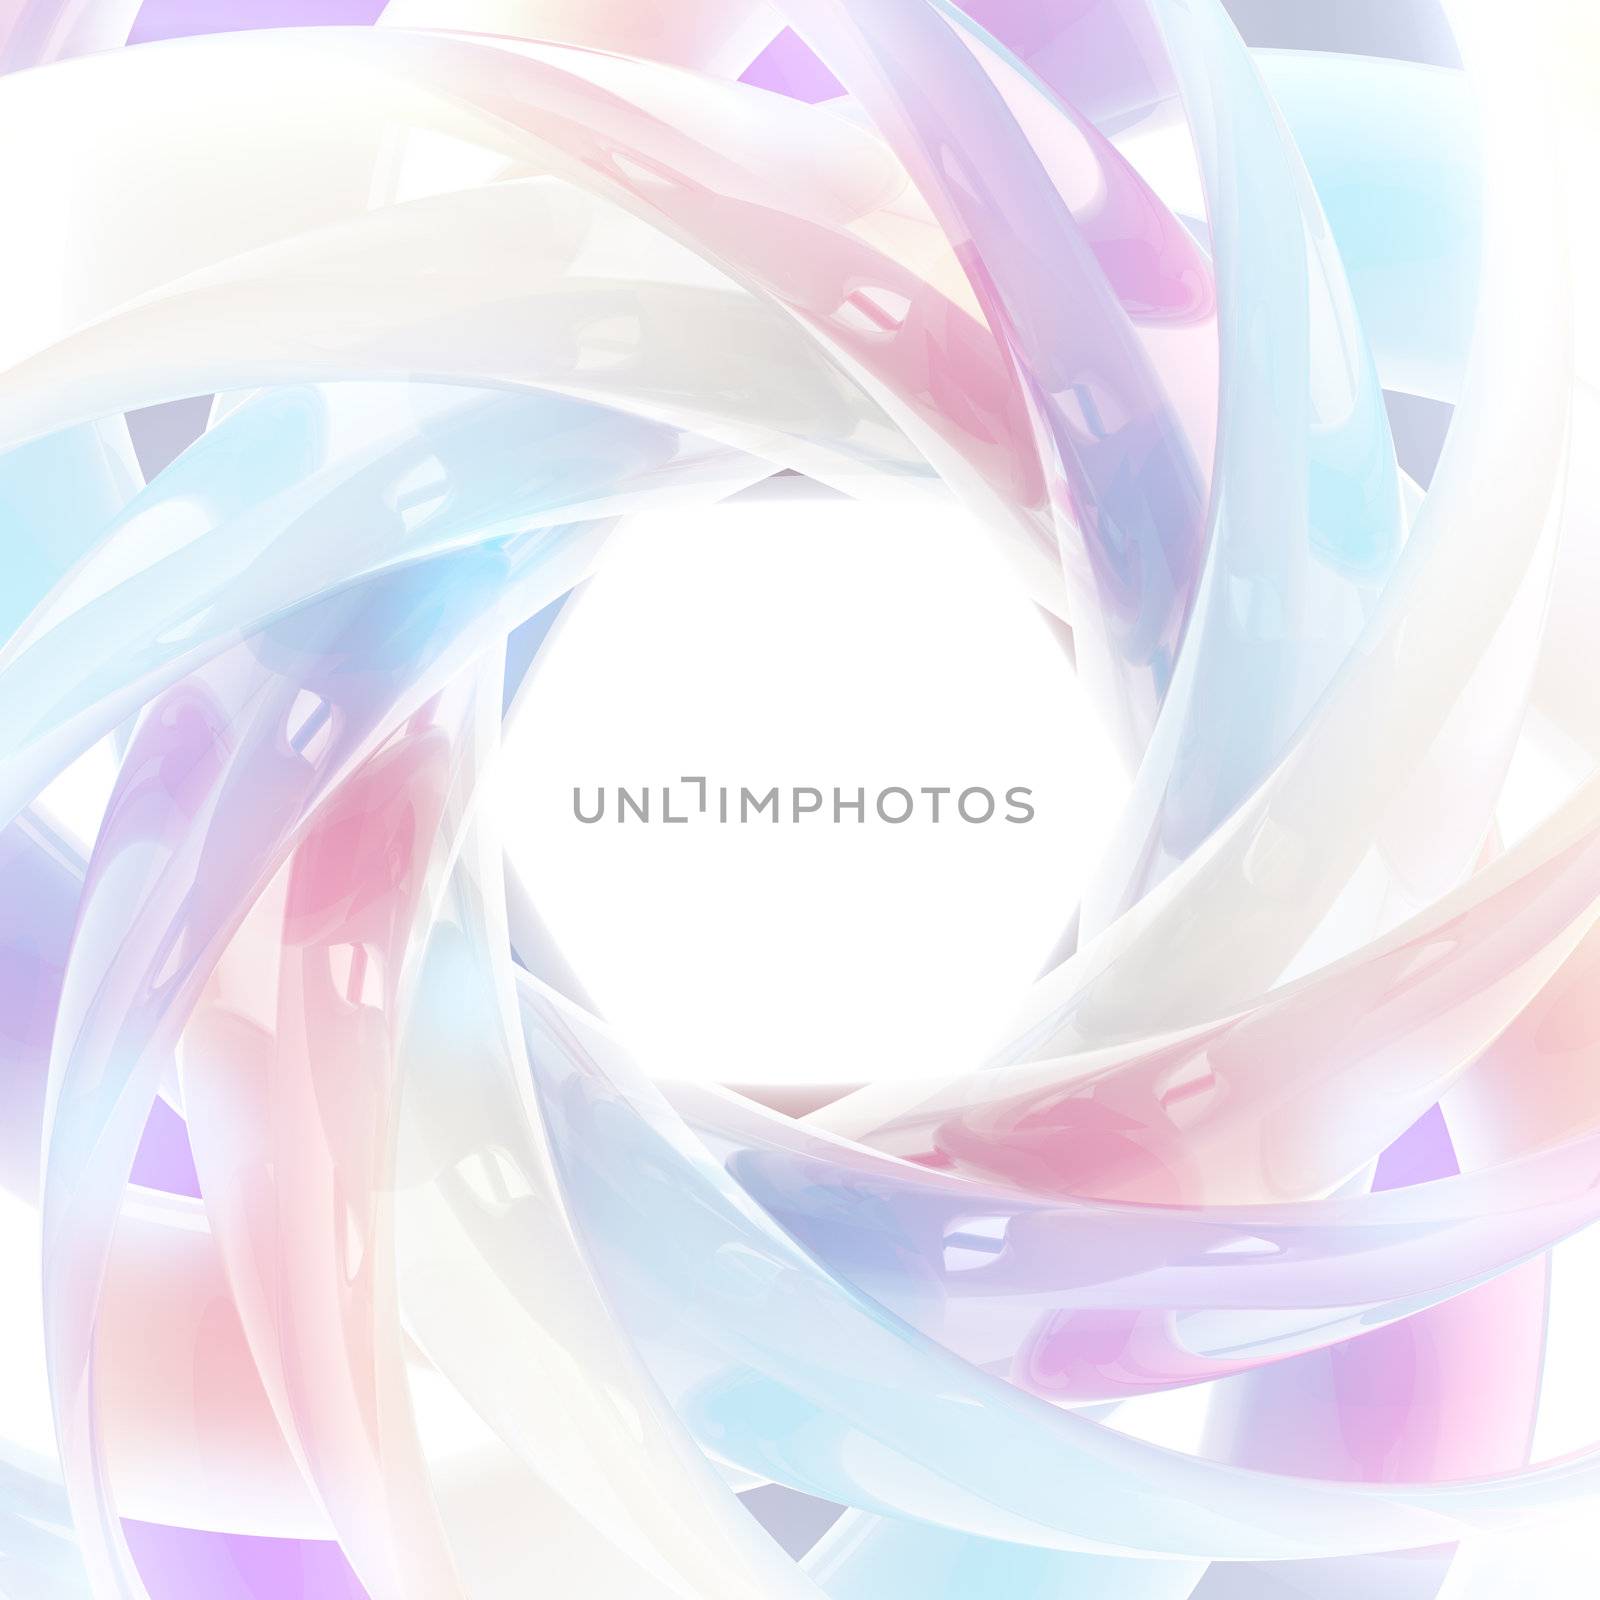 Abstract background made of light bright glossy spiral twirl